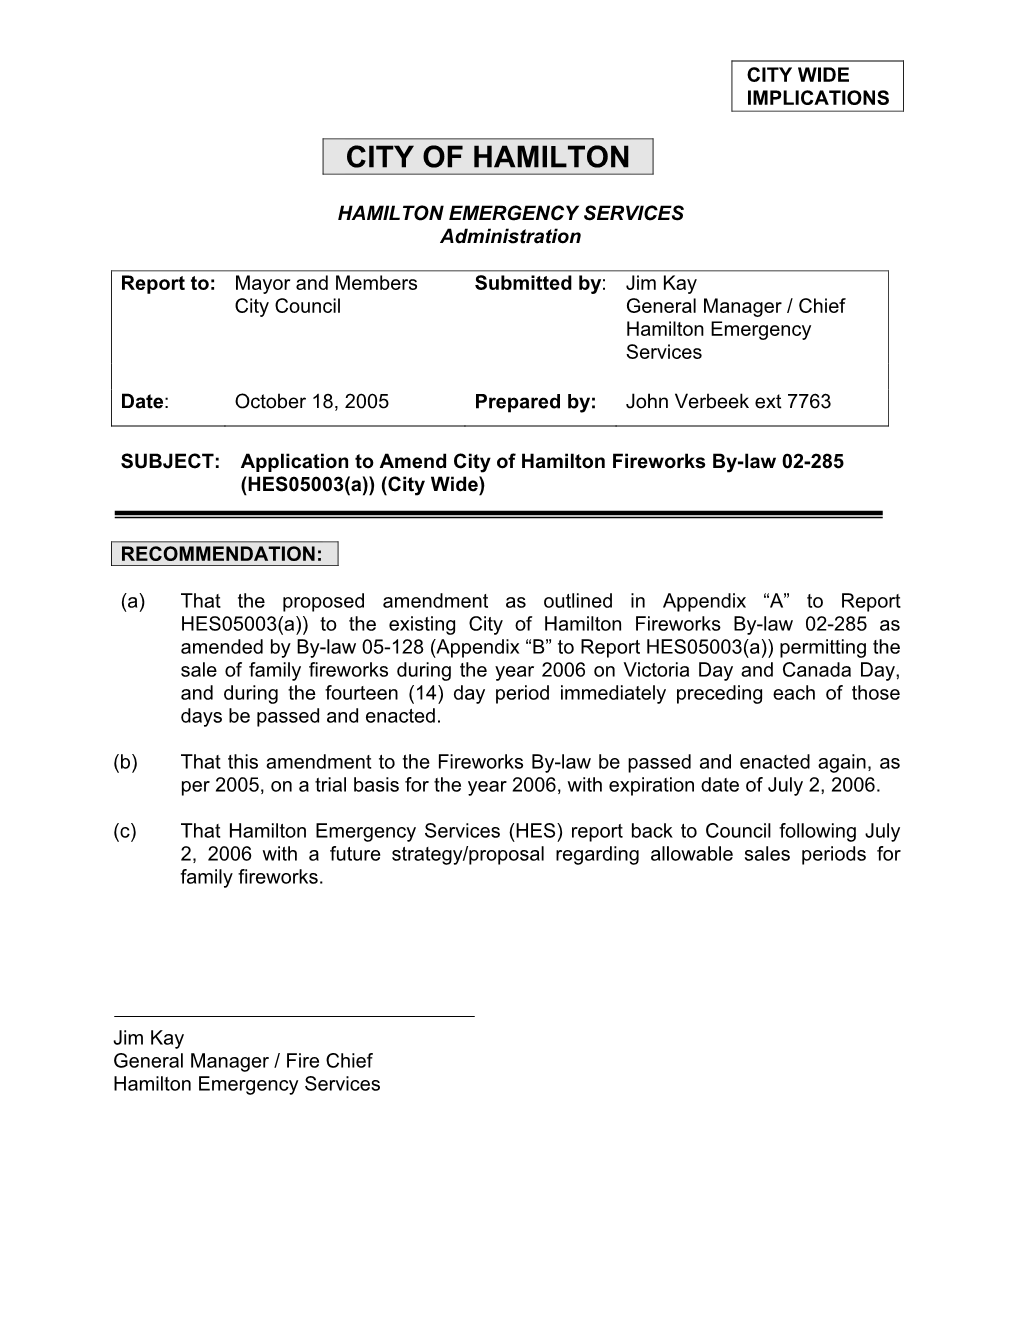 Application to Amend City of Hamilton Fireworks By-Law 02-285 (HES05003(A)) (City Wide)